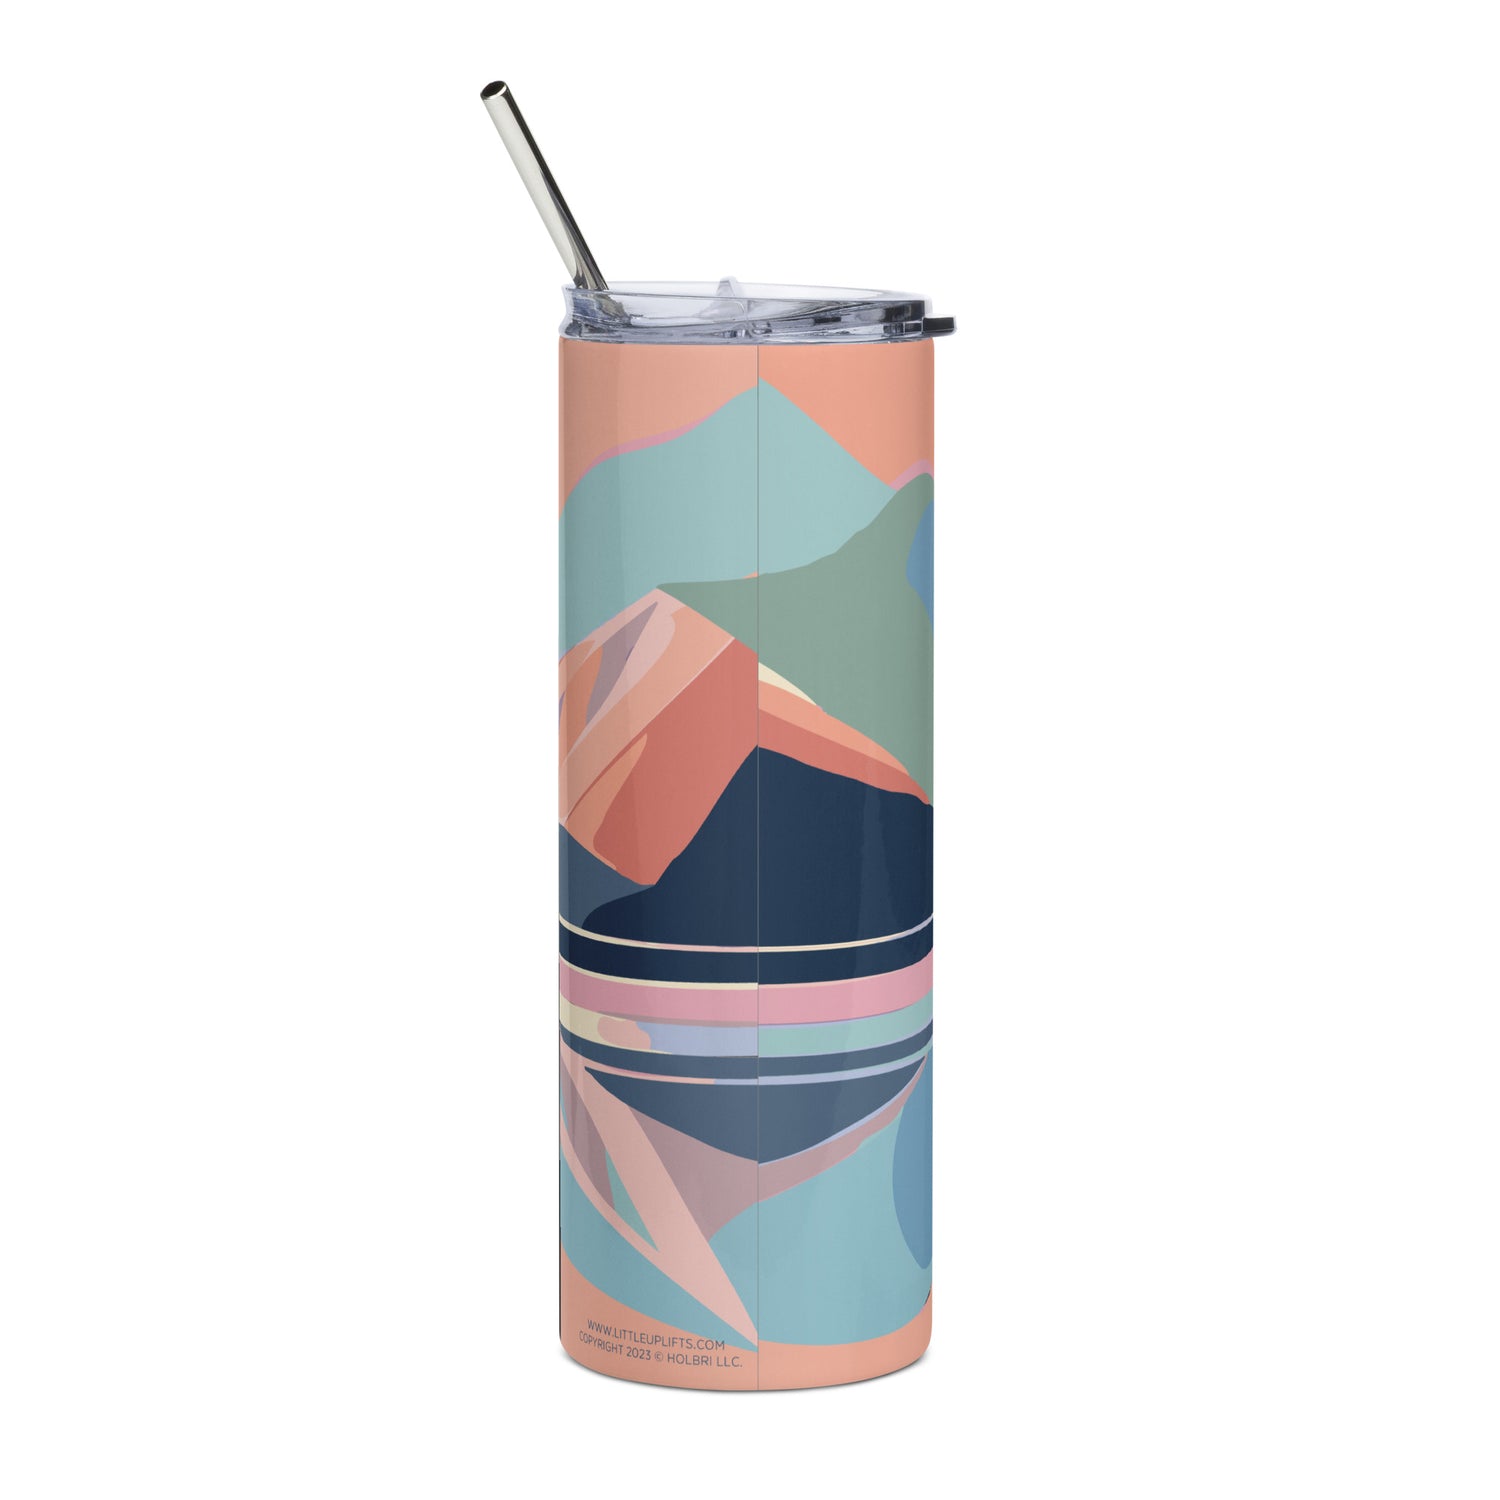 &quot;Show up, Step out, &amp; Shine&quot; Boho Stainless Steel Tumbler